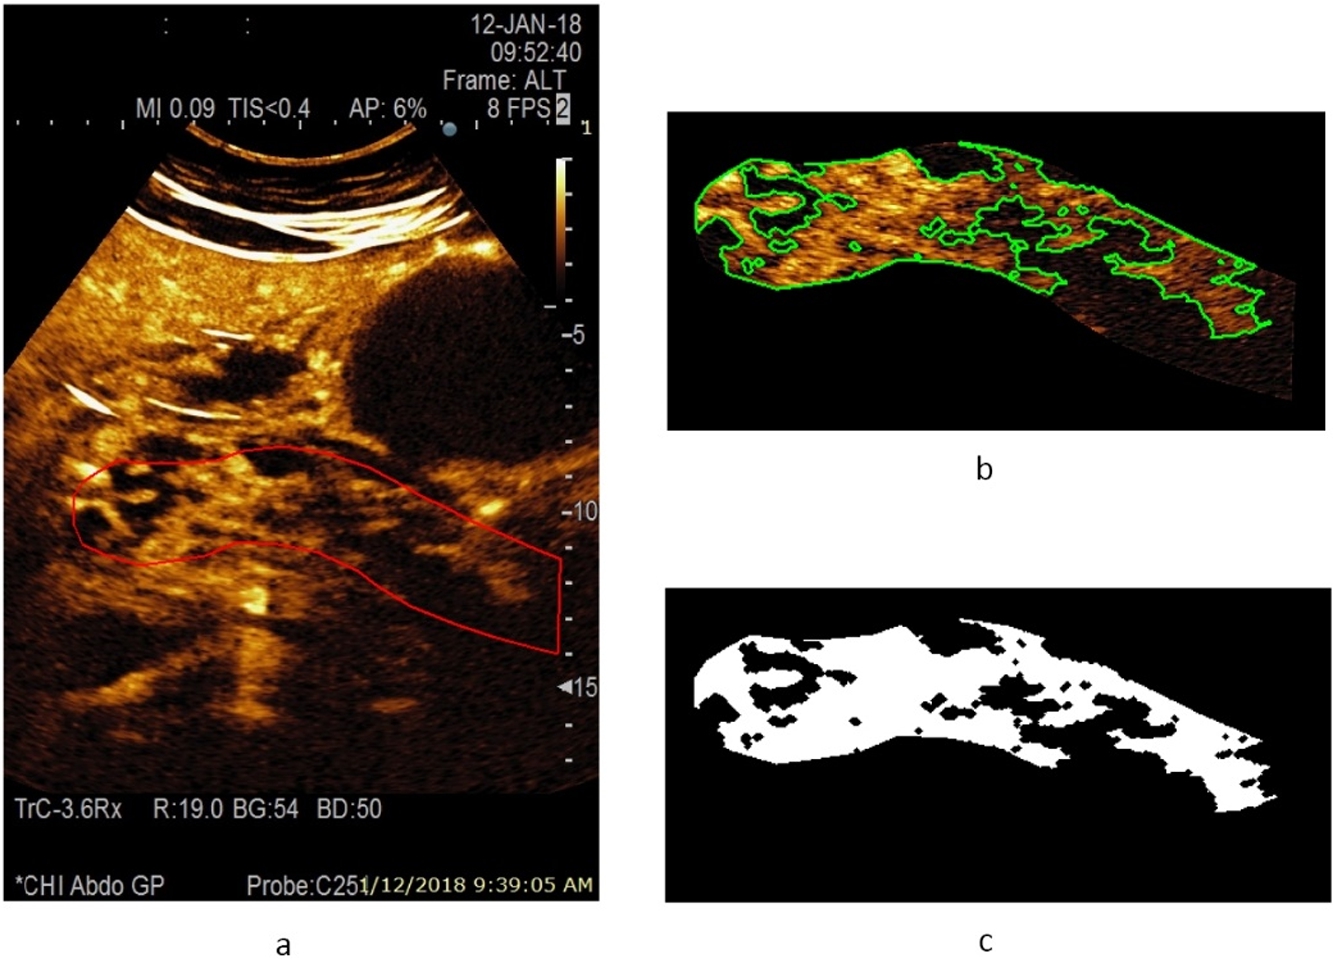 A CEUS image of a pancreas at 22 s after injection of contrast agent, and estimated area of a healthy parenchyma (according to the presence of perfusion) from a male patient with acute necrotizing pancreatitis: a – contrast harmonic image of the pancreas region and manually selected ROI marked with a solid red line, b – extracted informative ROI for further automatic detection of healthy parenchyma areas marked with a solid green line, c – automatically detected area of a healthy parenchyma (white colour) covering 55.6% of overall pancreas ROI.